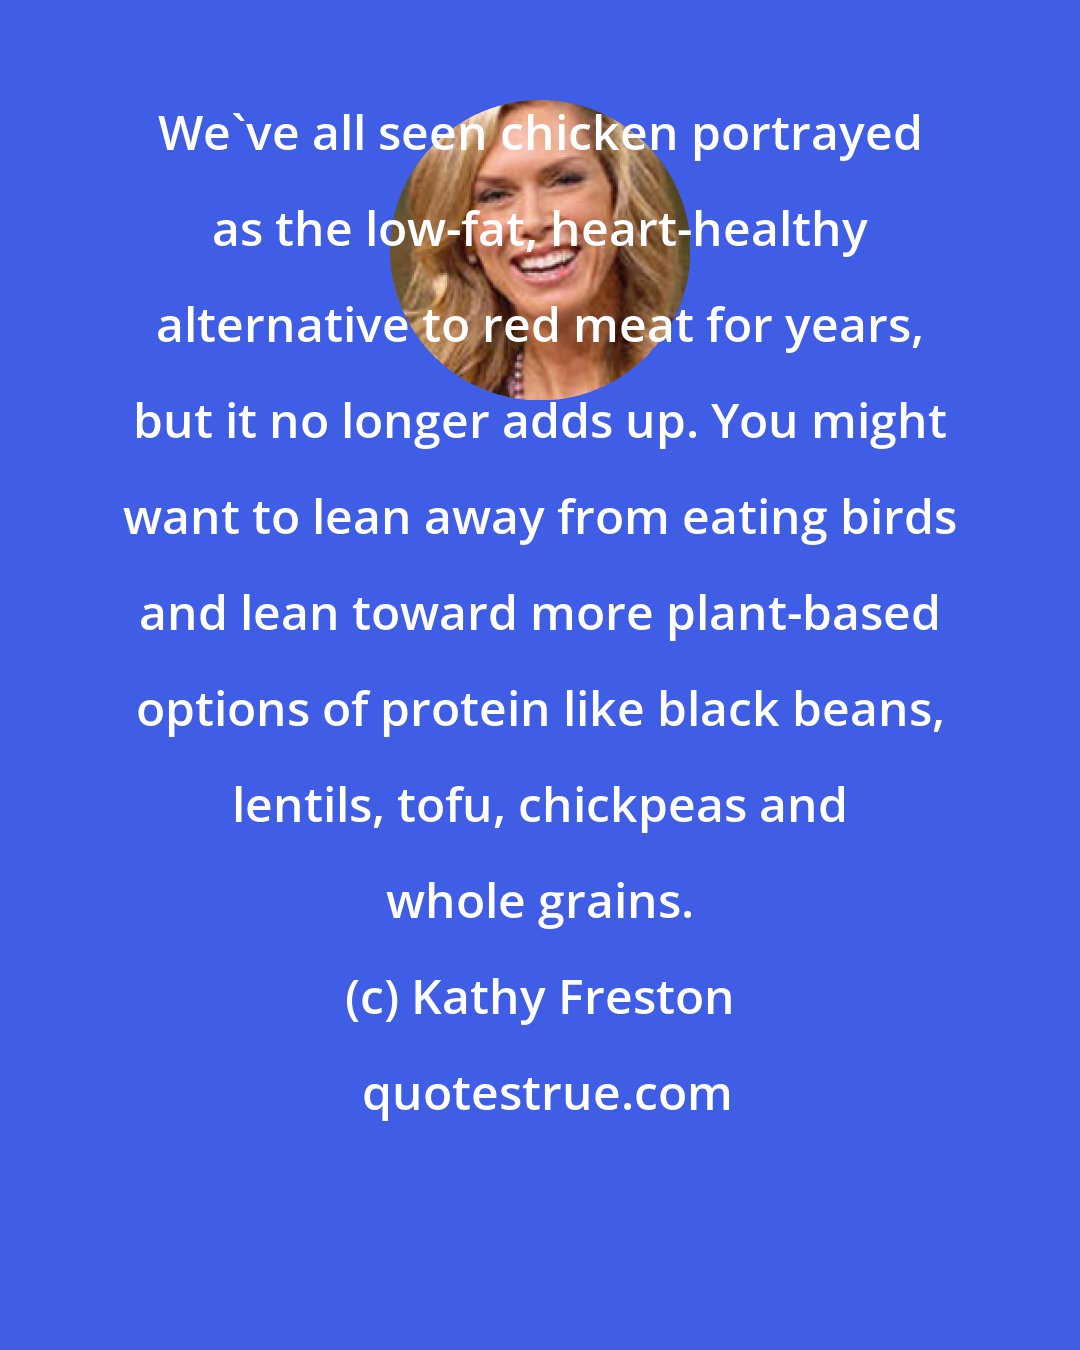 Kathy Freston: We've all seen chicken portrayed as the low-fat, heart-healthy alternative to red meat for years, but it no longer adds up. You might want to lean away from eating birds and lean toward more plant-based options of protein like black beans, lentils, tofu, chickpeas and whole grains.